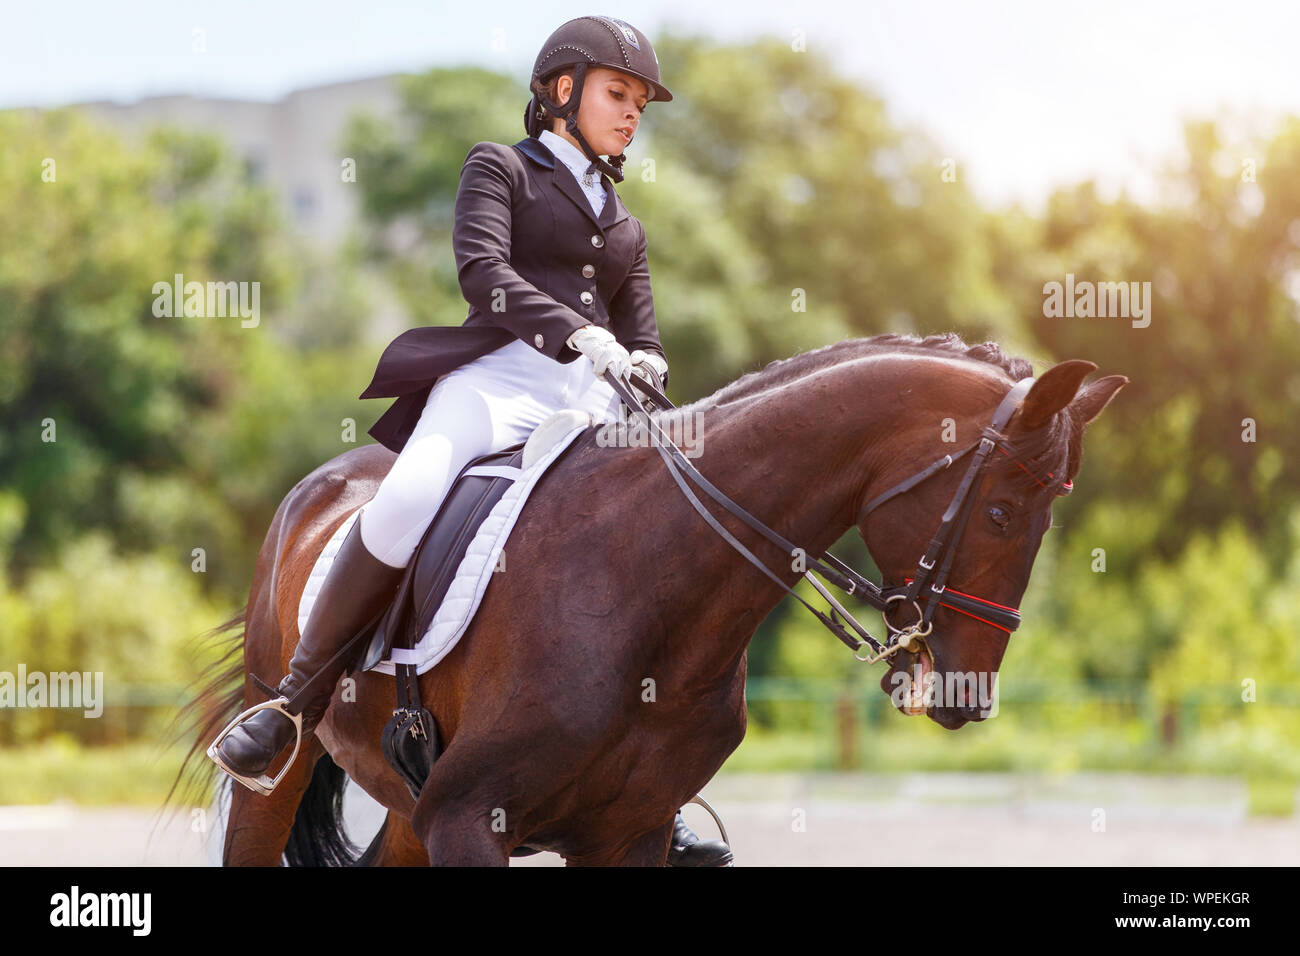 Young female horse rider on equestrian sport competition Stock Photo - Alamy